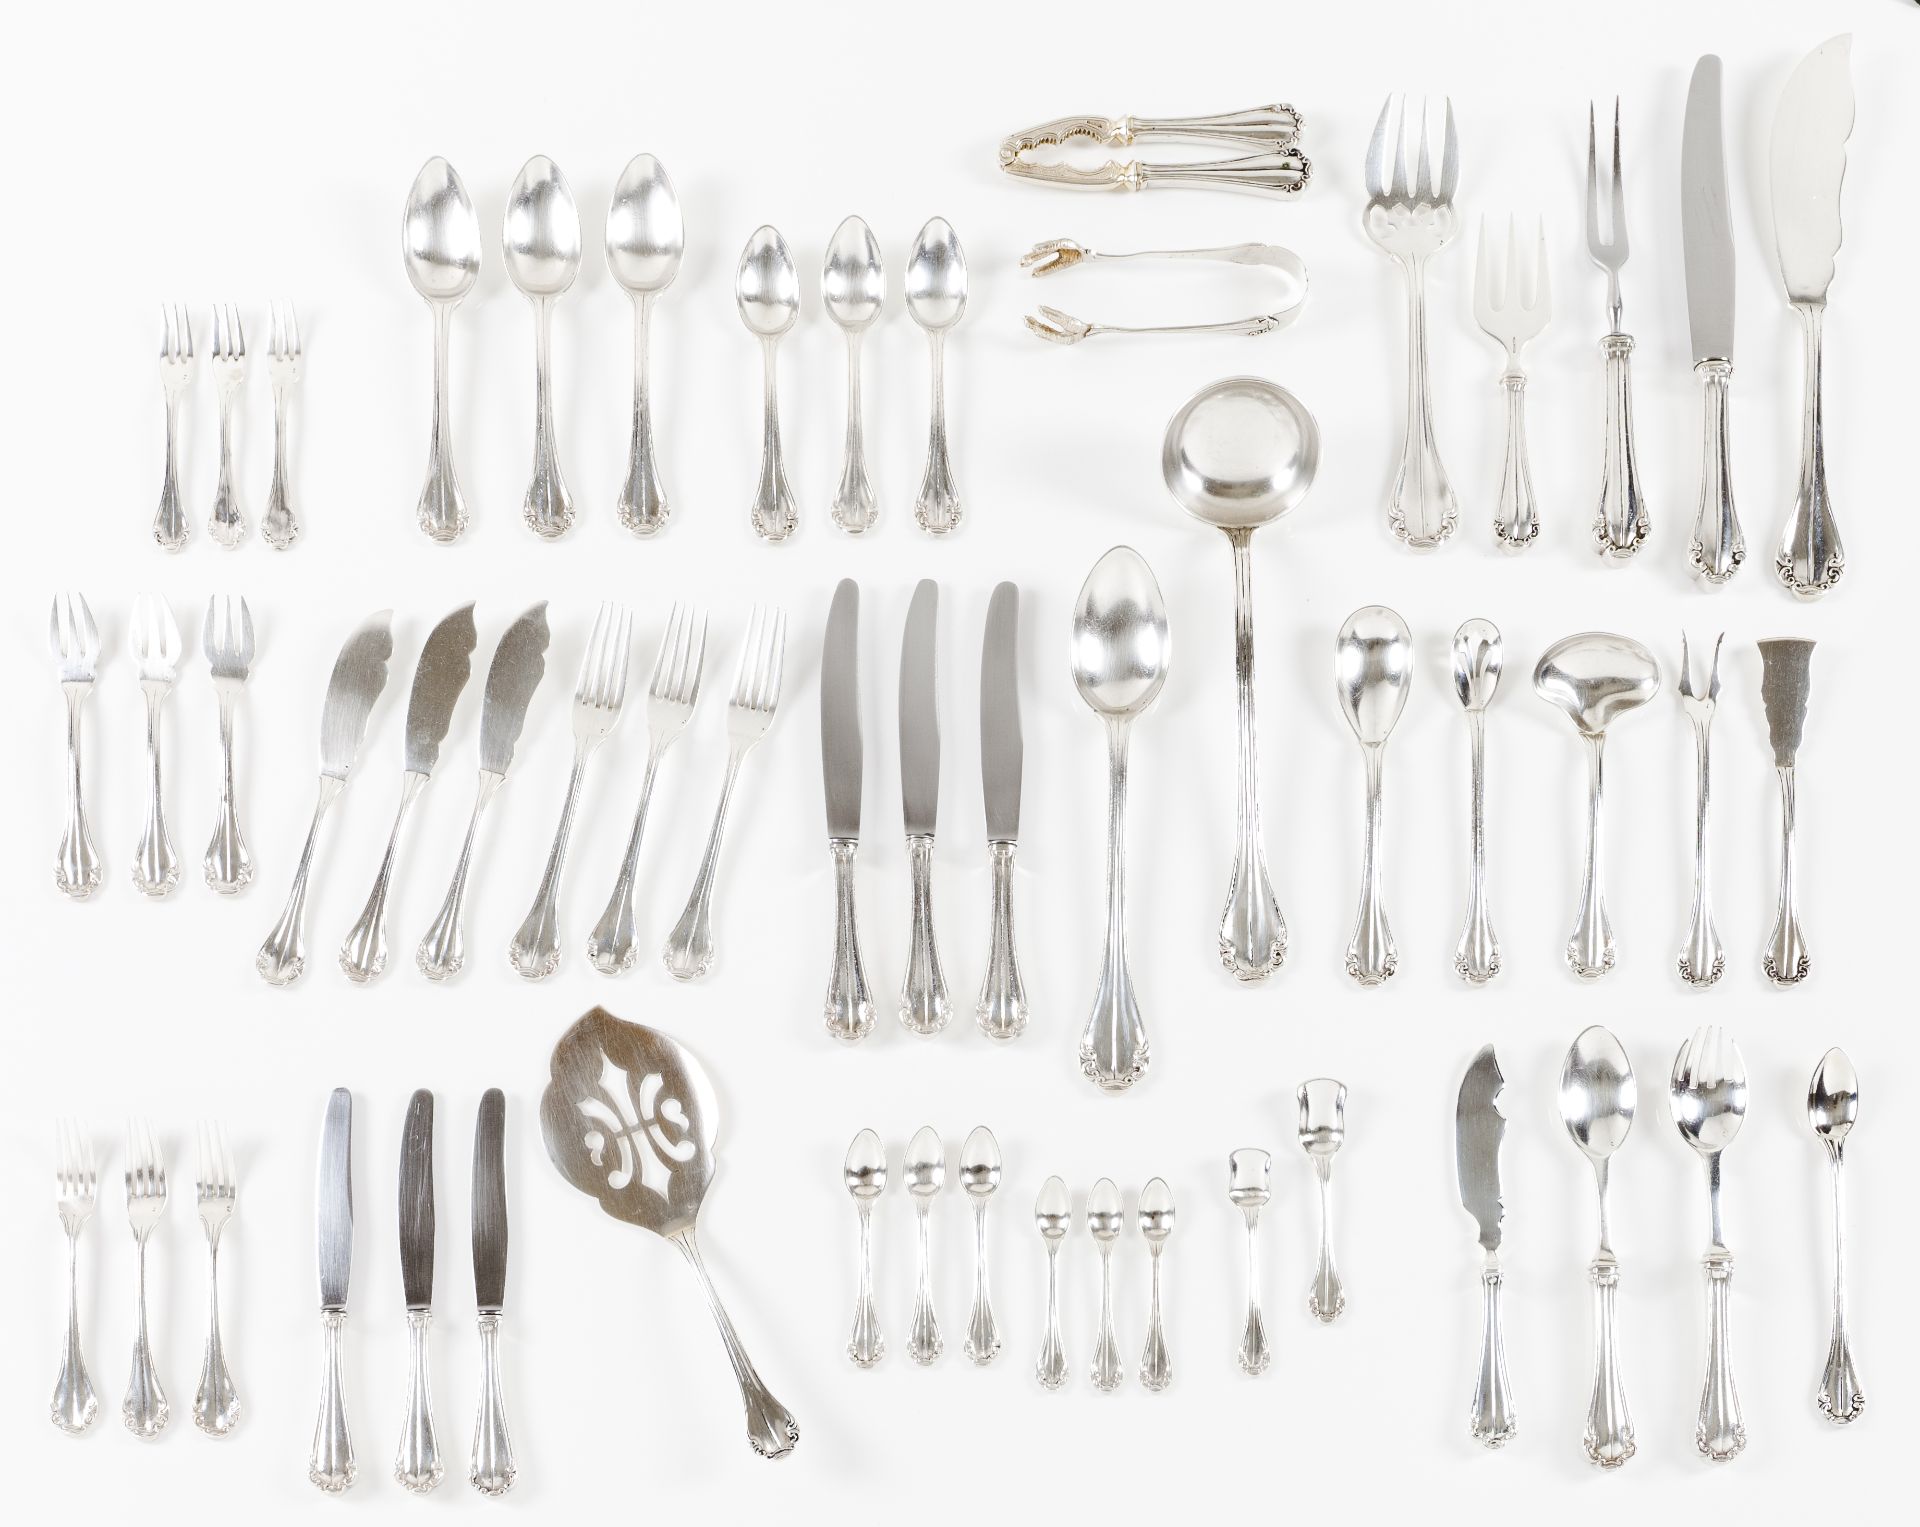 A 12 cover cutlery setPortuguese silverFrieze and volute decorated handlesSoup spoons, meat forks